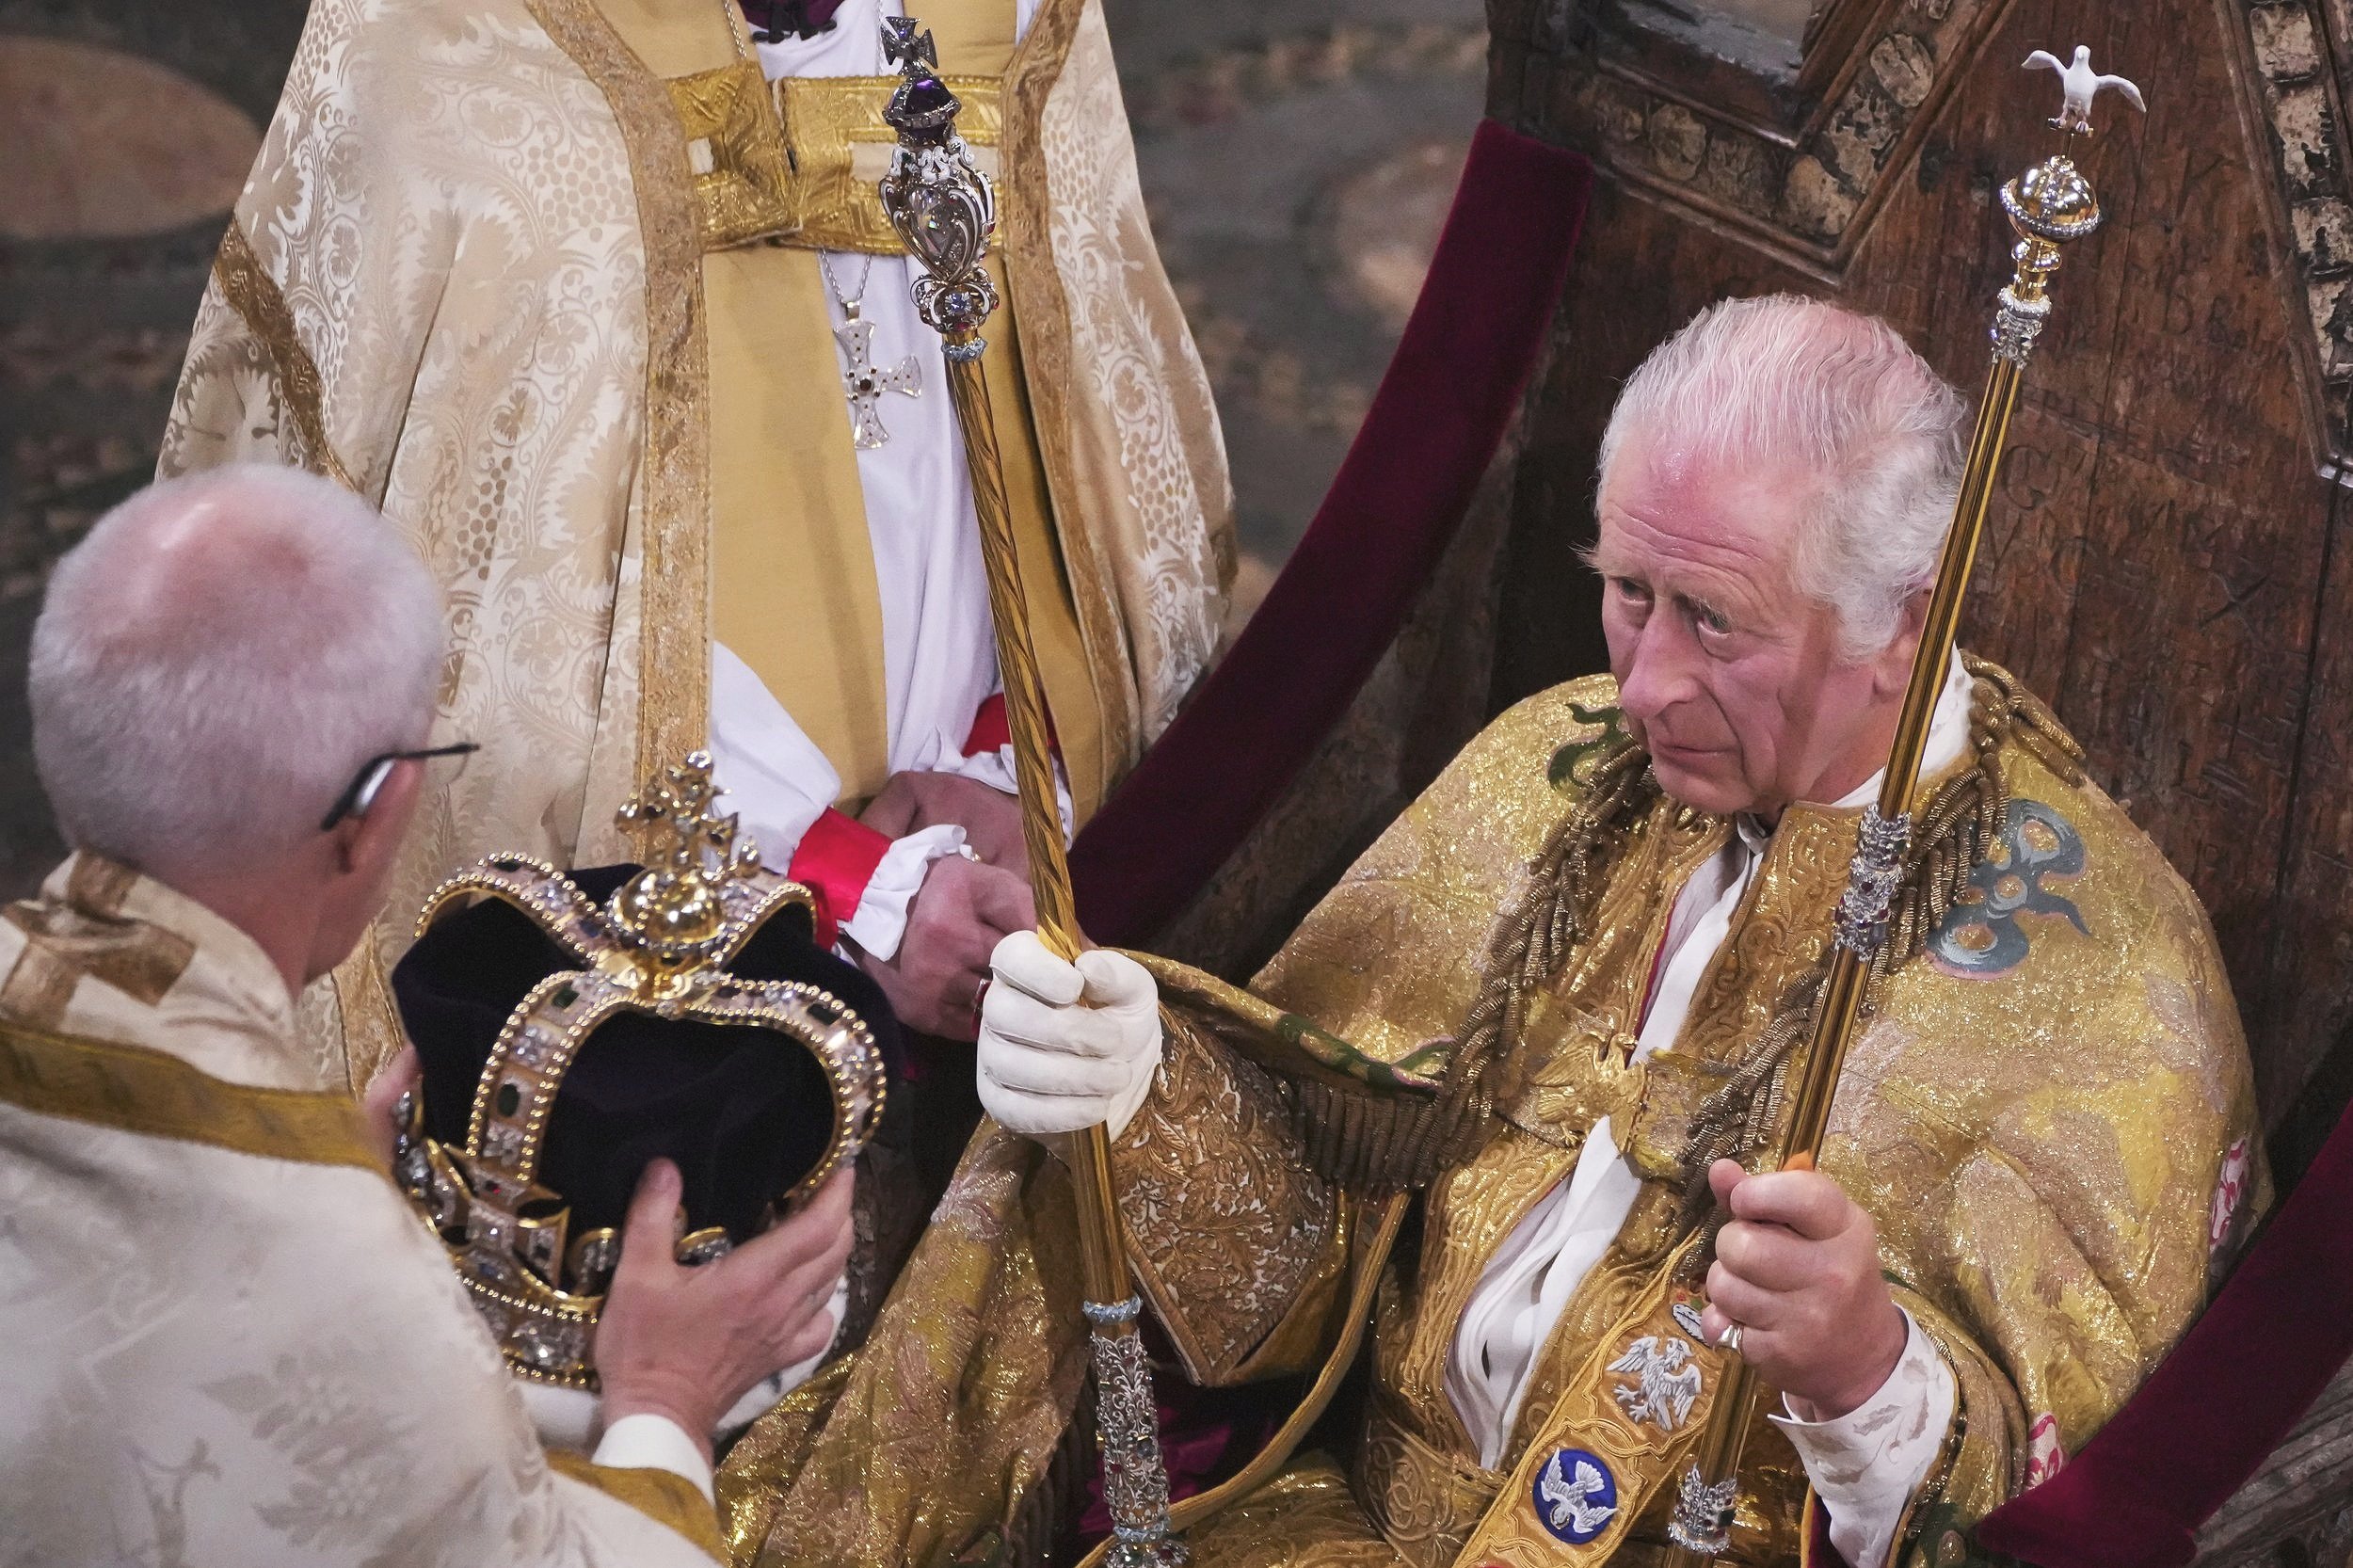  King Charles III, seated in St Edward's Chair, also known as the Coronation Chair, before being crowned with St Edward's Crown by The Archbishop of Canterbury the Most Reverend Justin Welby during his coronation ceremony in Westminster Abbey, London